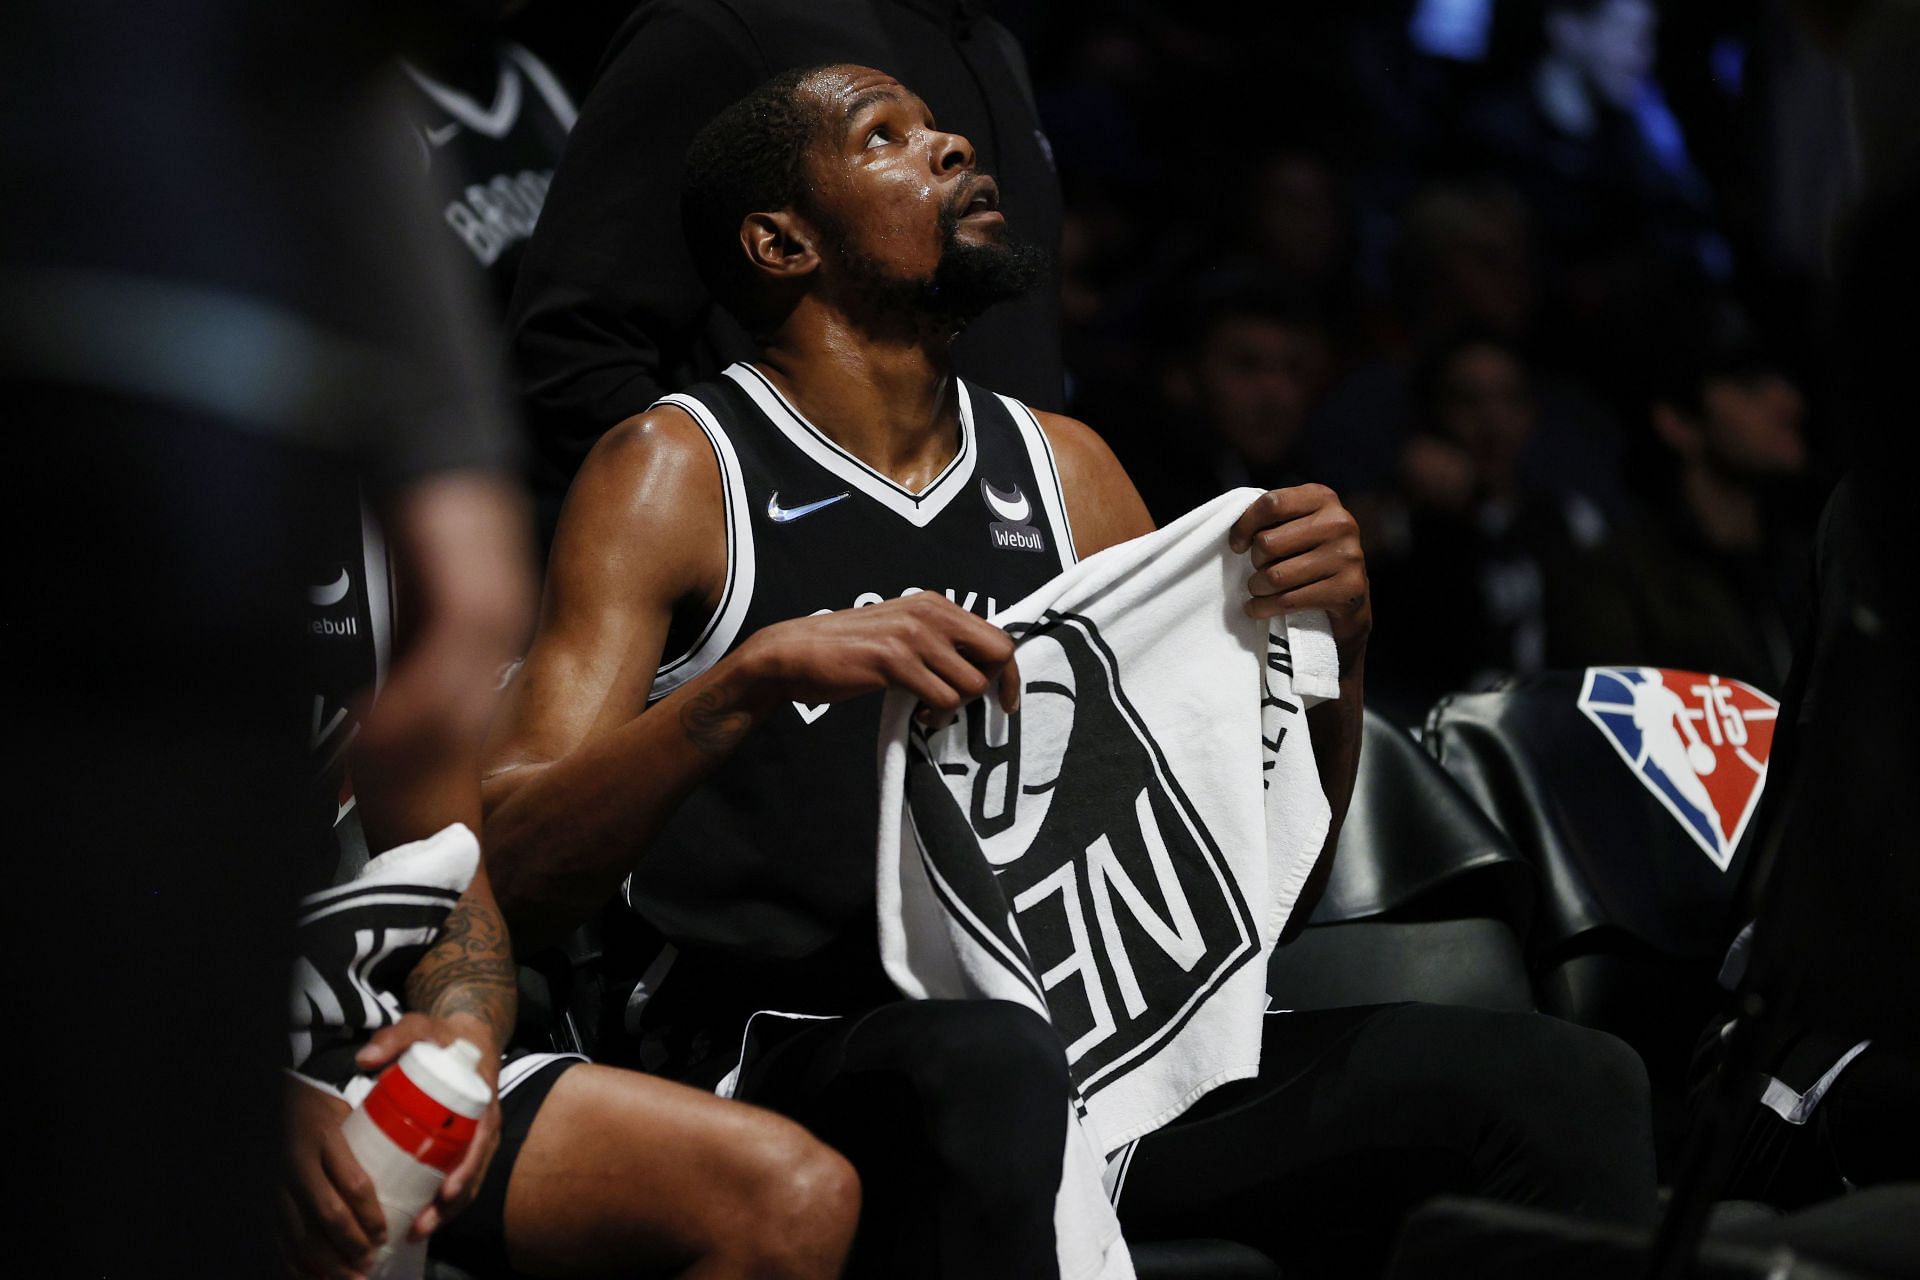 Kevin Durant of the Brooklyn Nets looks on during a timeout during the first half against the New York Knicks at Barclays Center on Sunday in the Brooklyn borough of New York City.